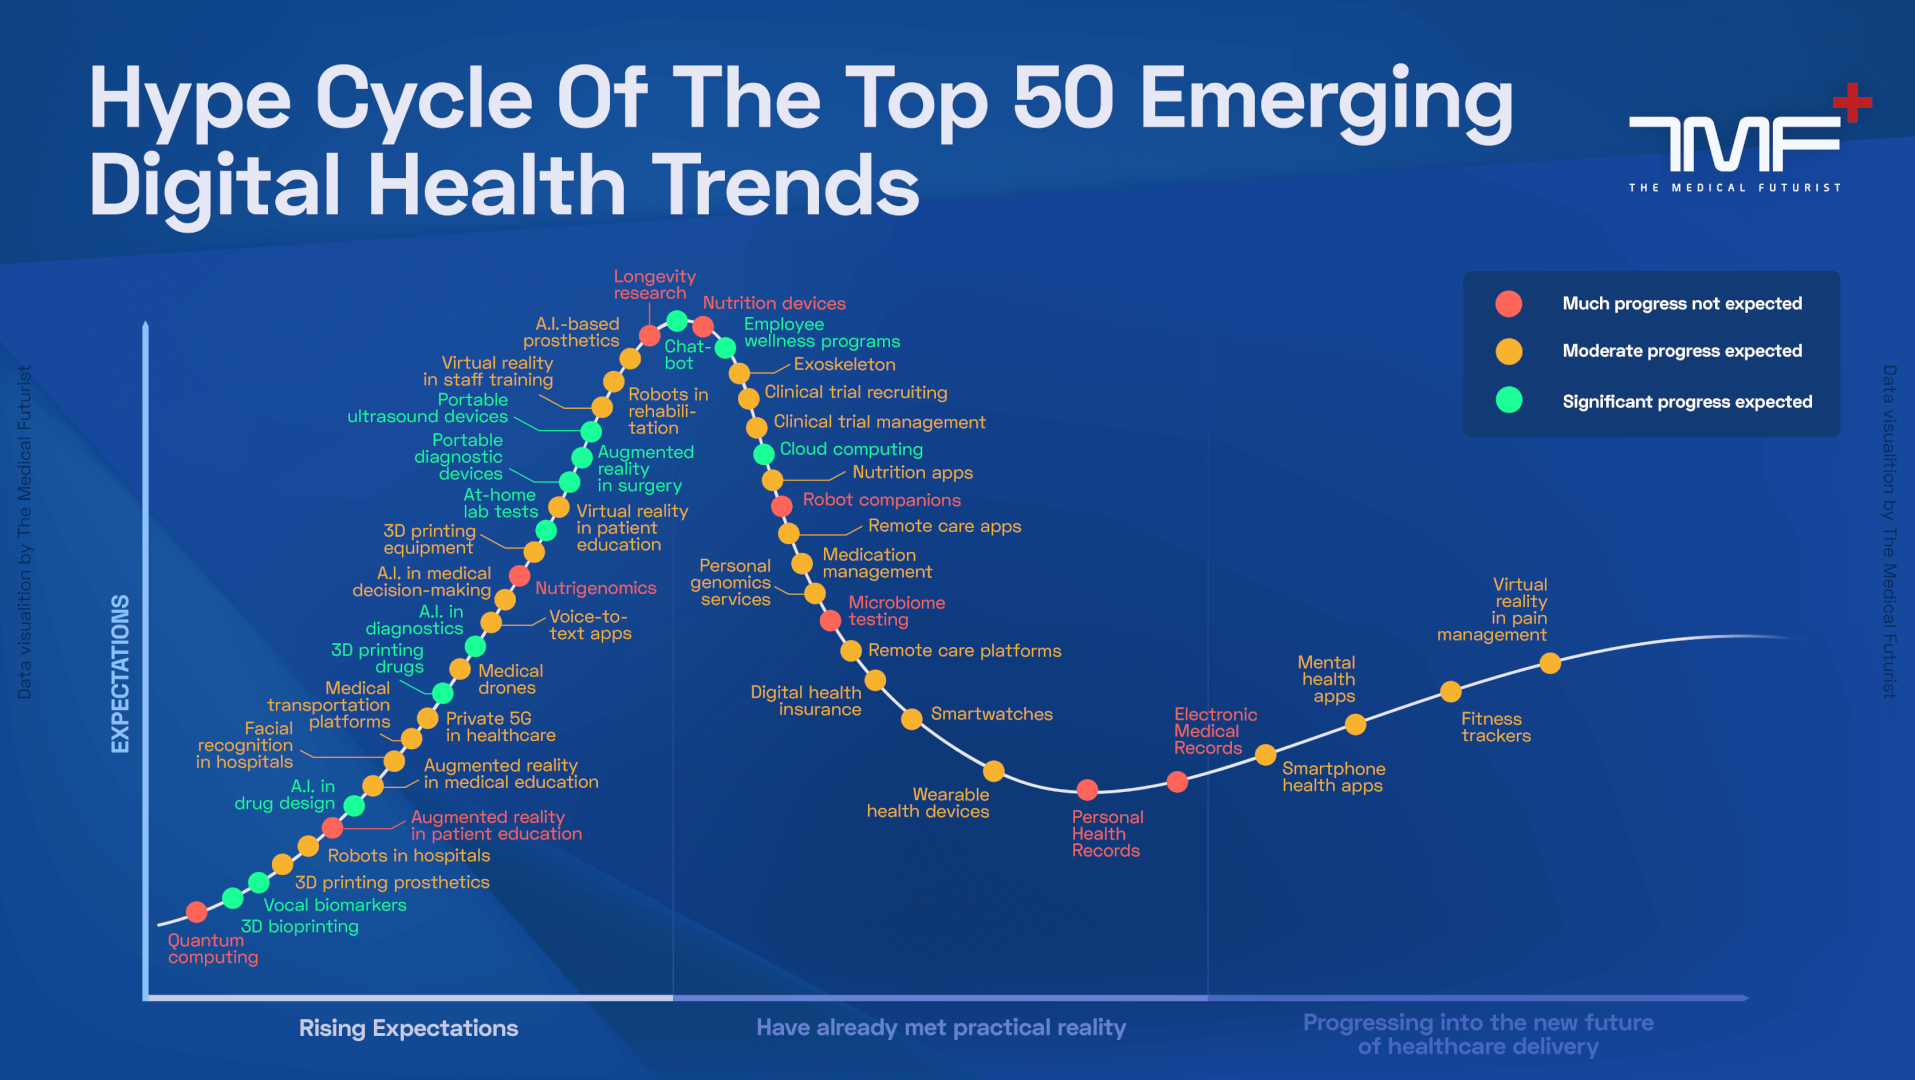 Hype Cycle Of The Top 50 Emerging Digital Health Trends The Medical